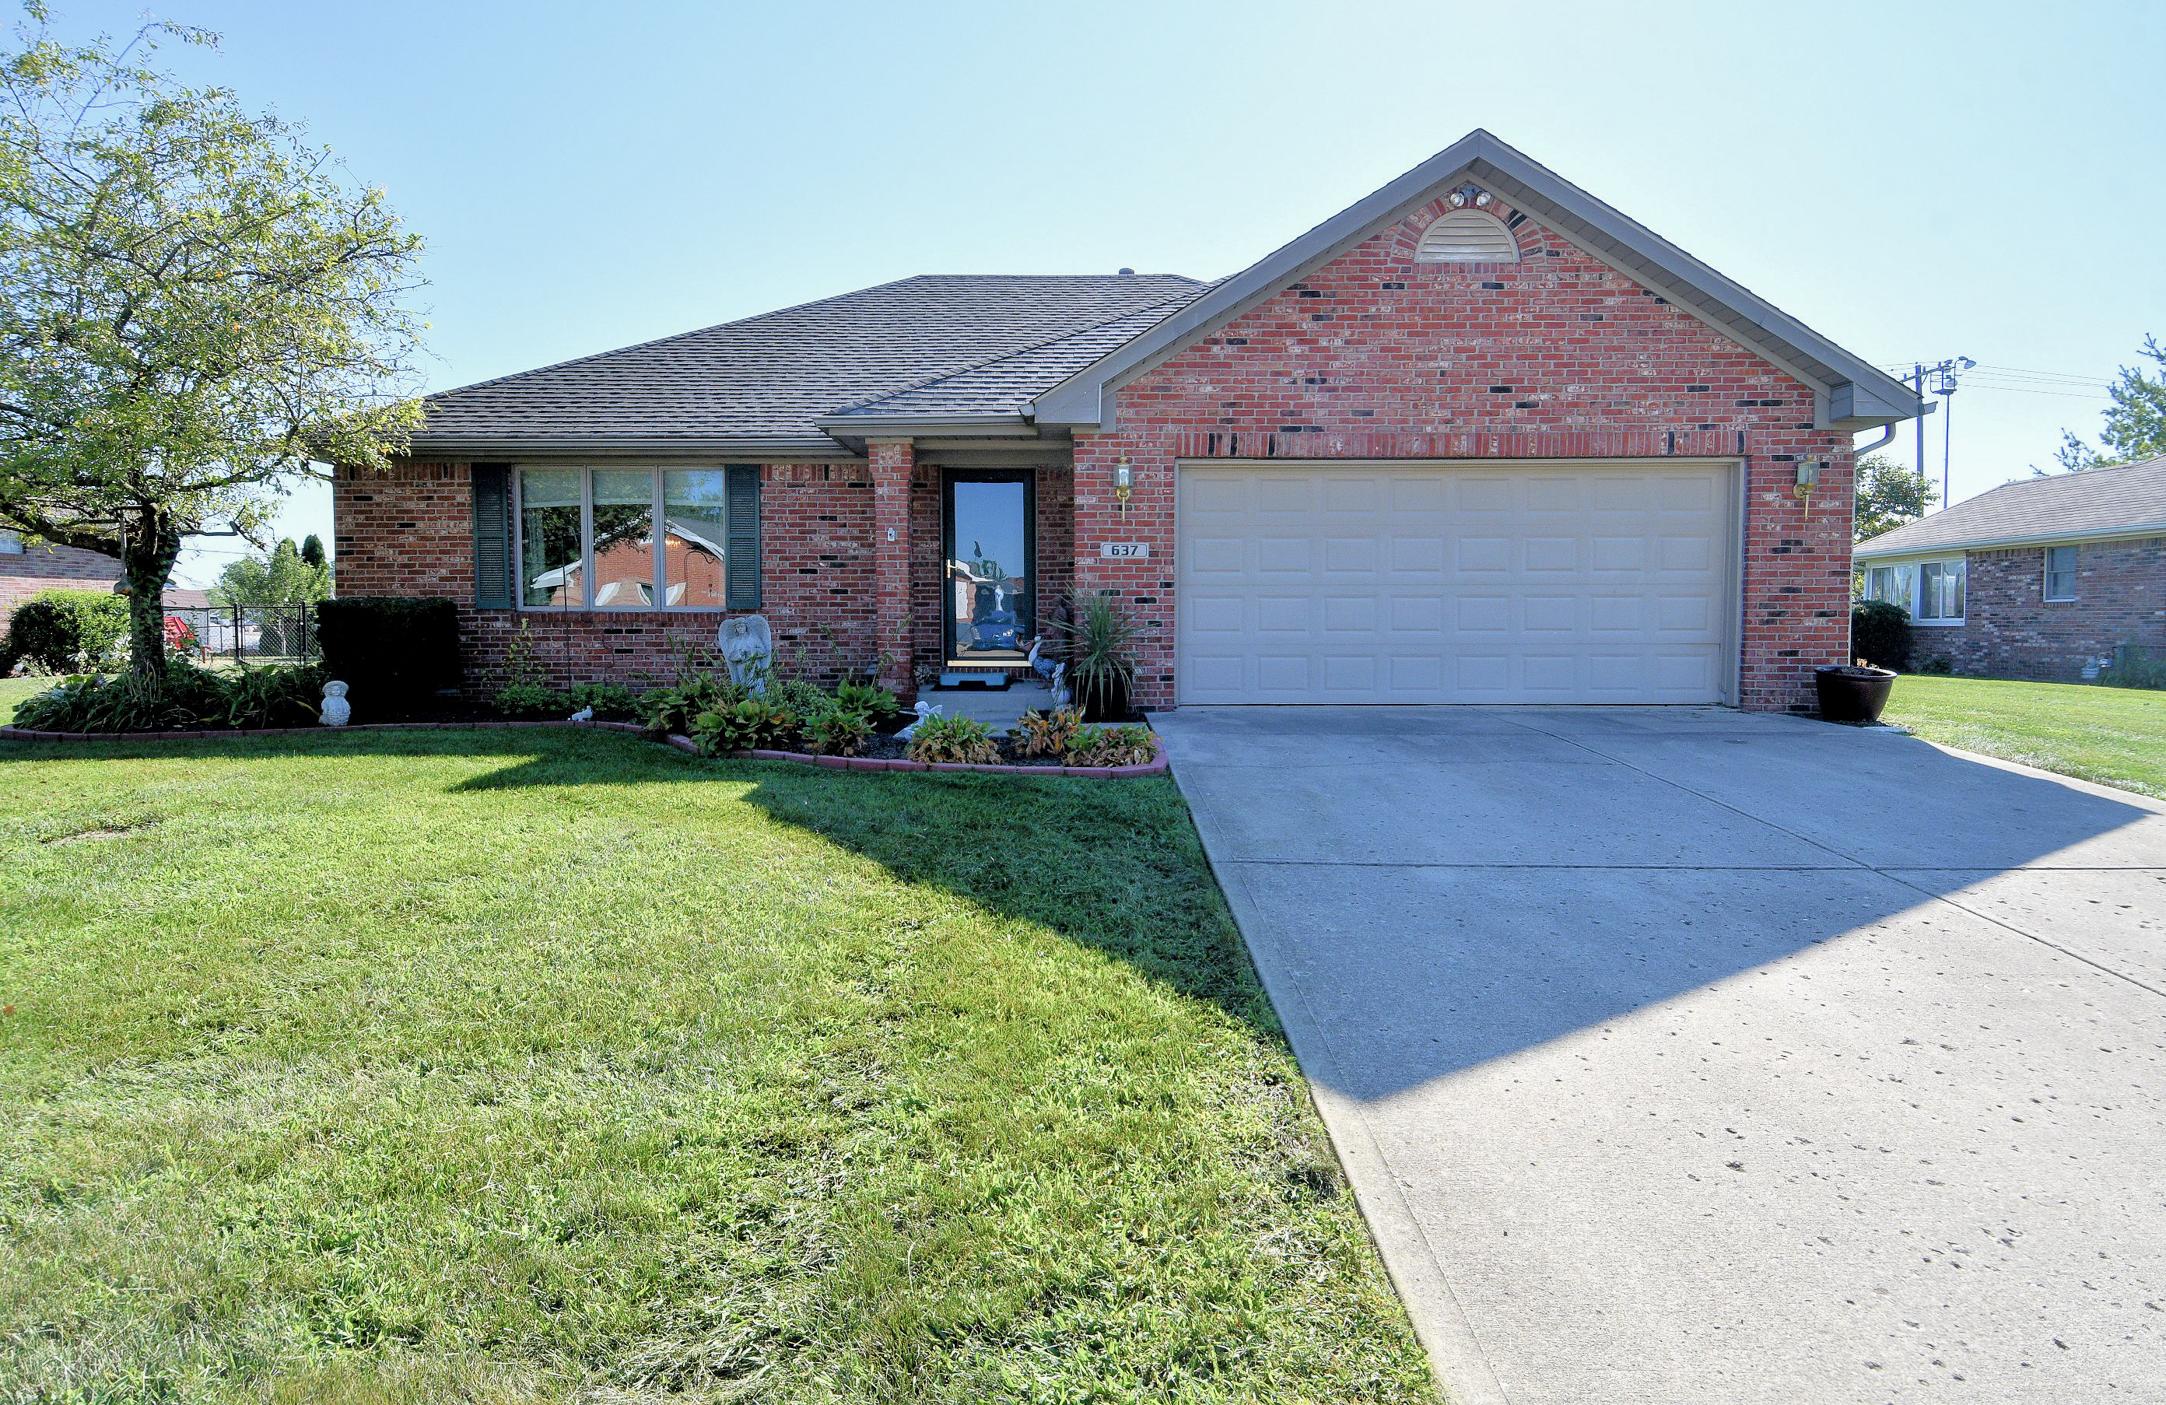 Photo one of 637 S Grant St Brownsburg IN 46112 | MLS 21972459